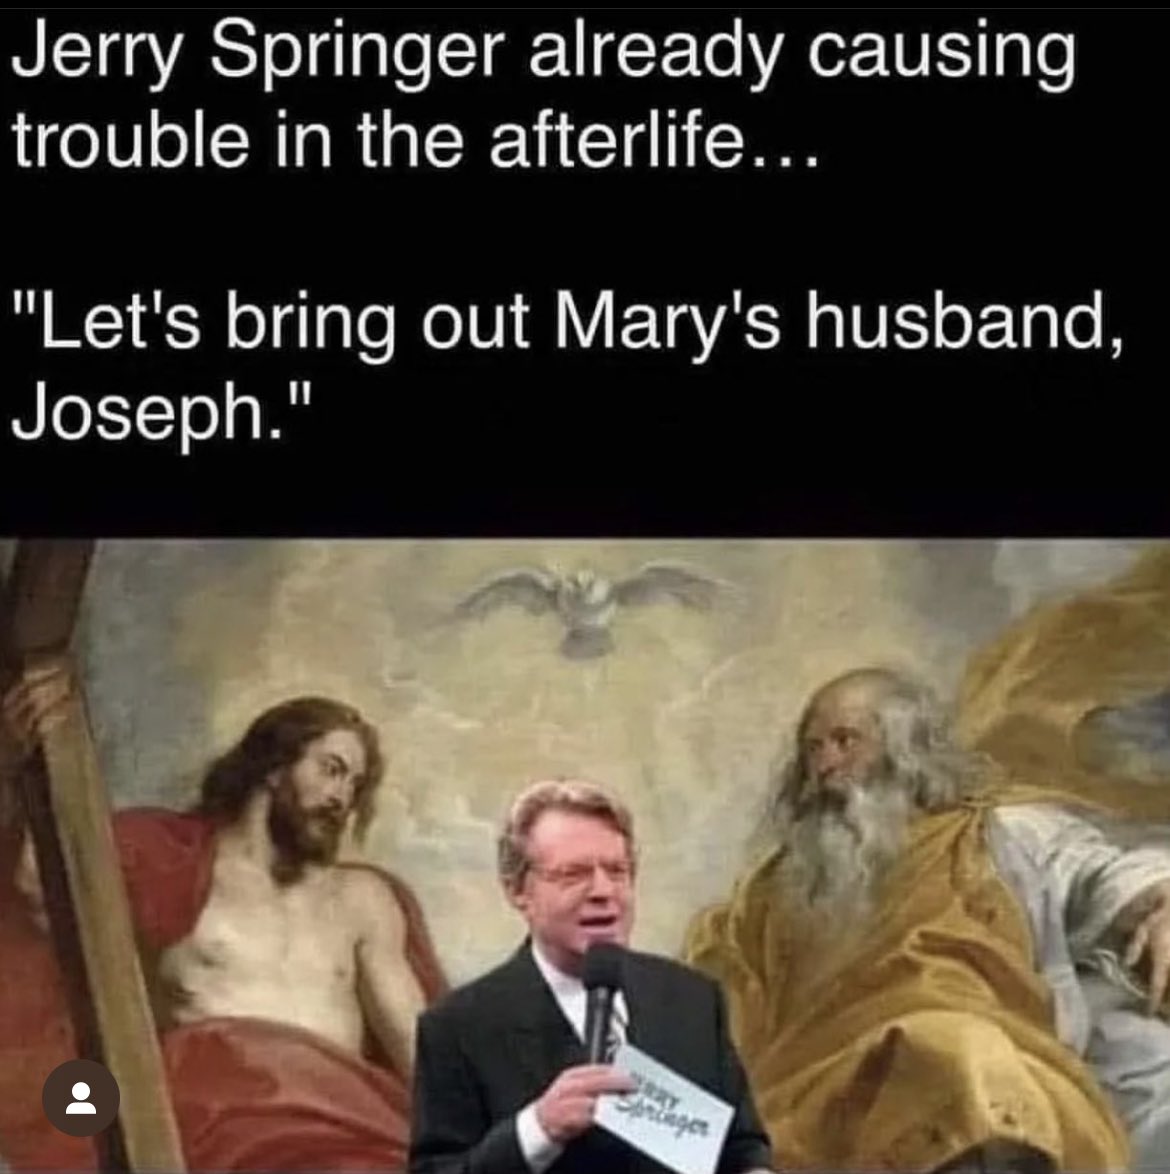 You know my boy Jerry up there causing RUCKUS!!! #RIPJerrySpringer